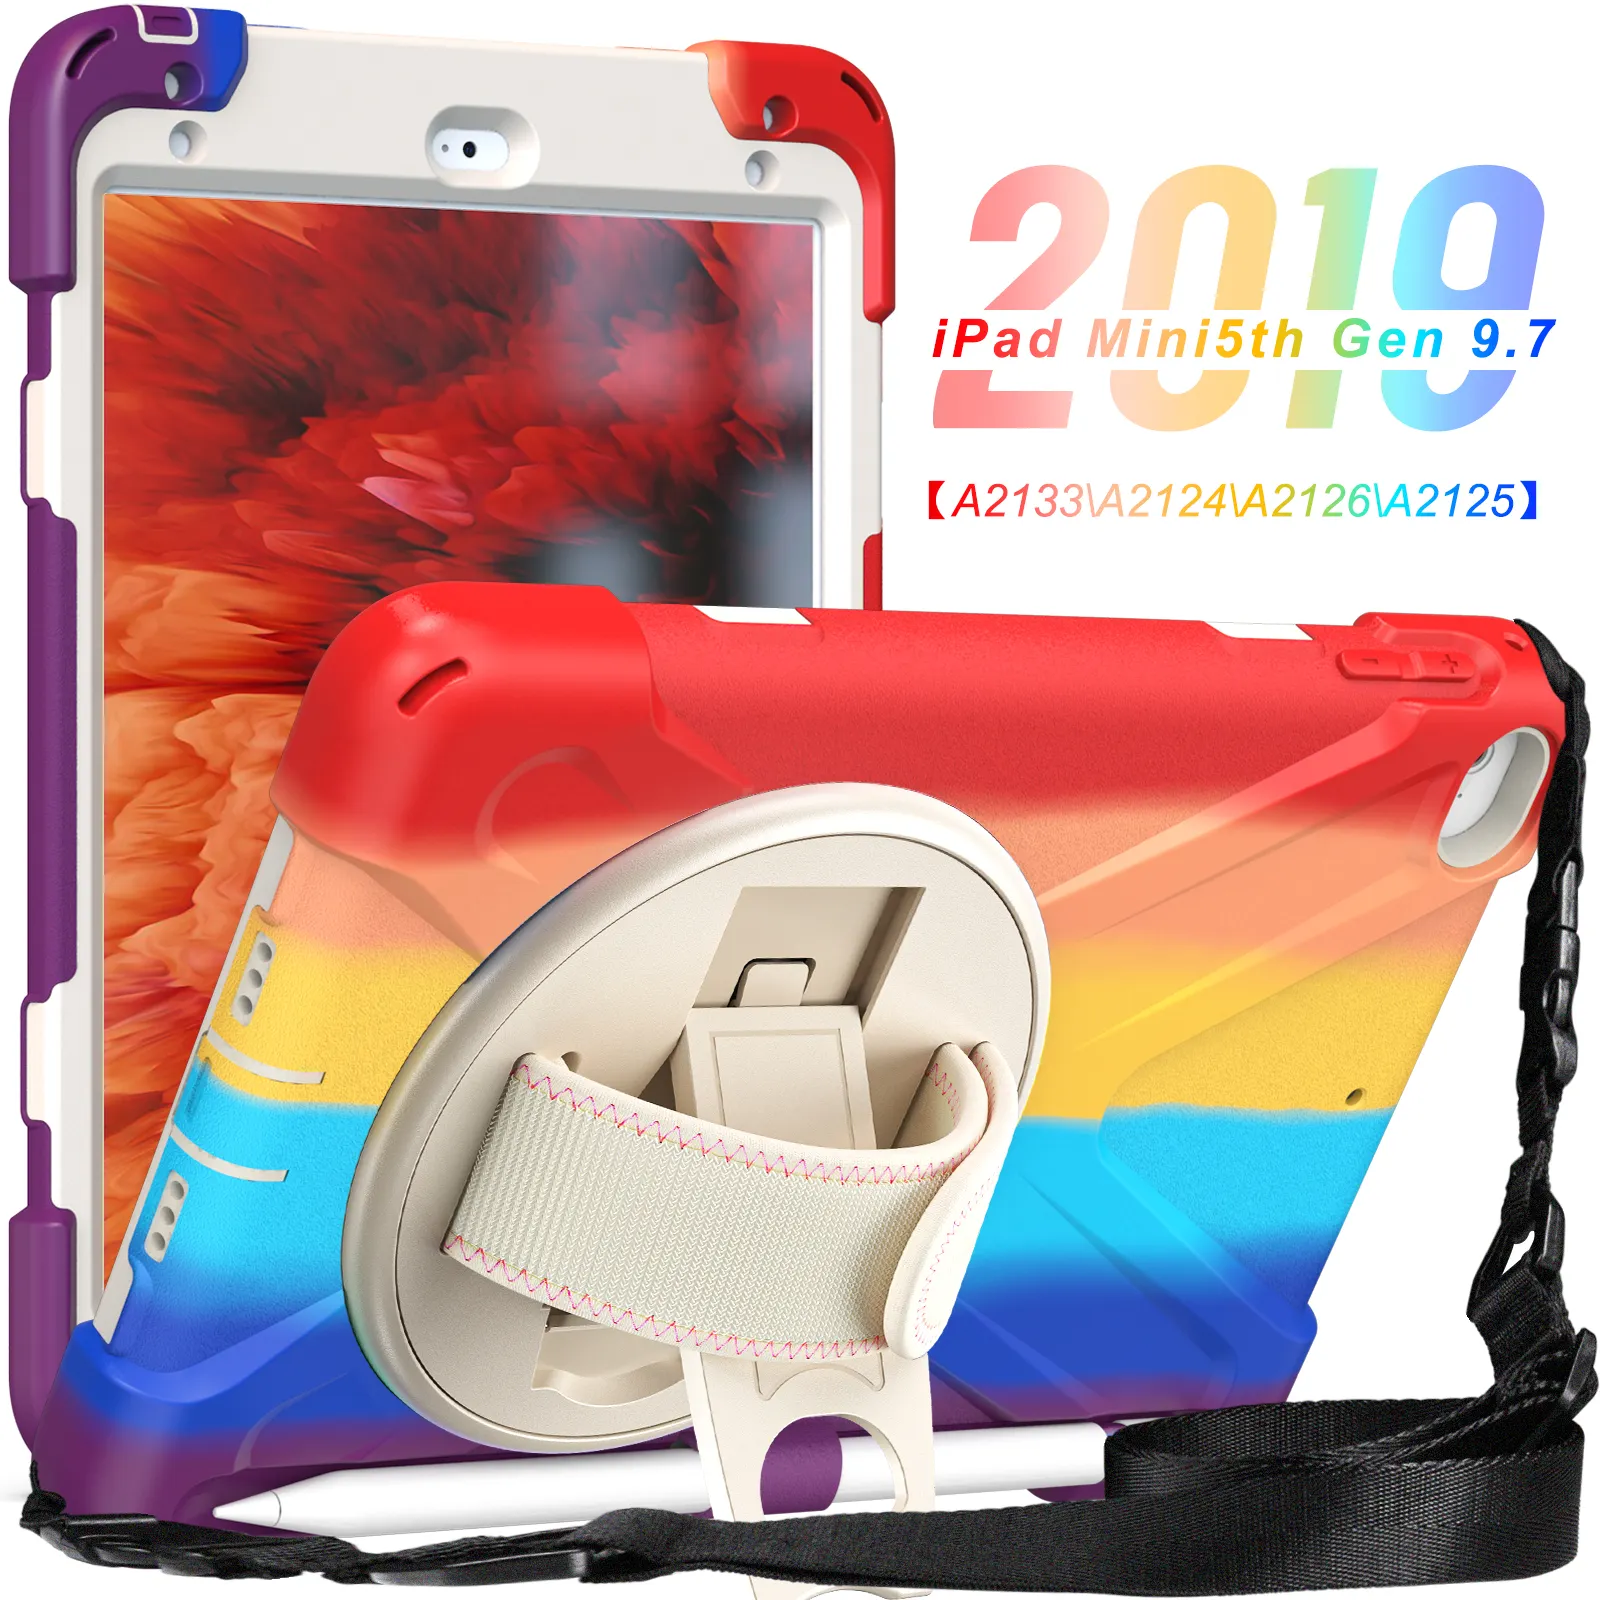 Case For iPad Mini 4 5 7.9 inch Full Protection 360 Rotation Hand Kickstand Silicone Case Colorful Rainbow Tablet Cover